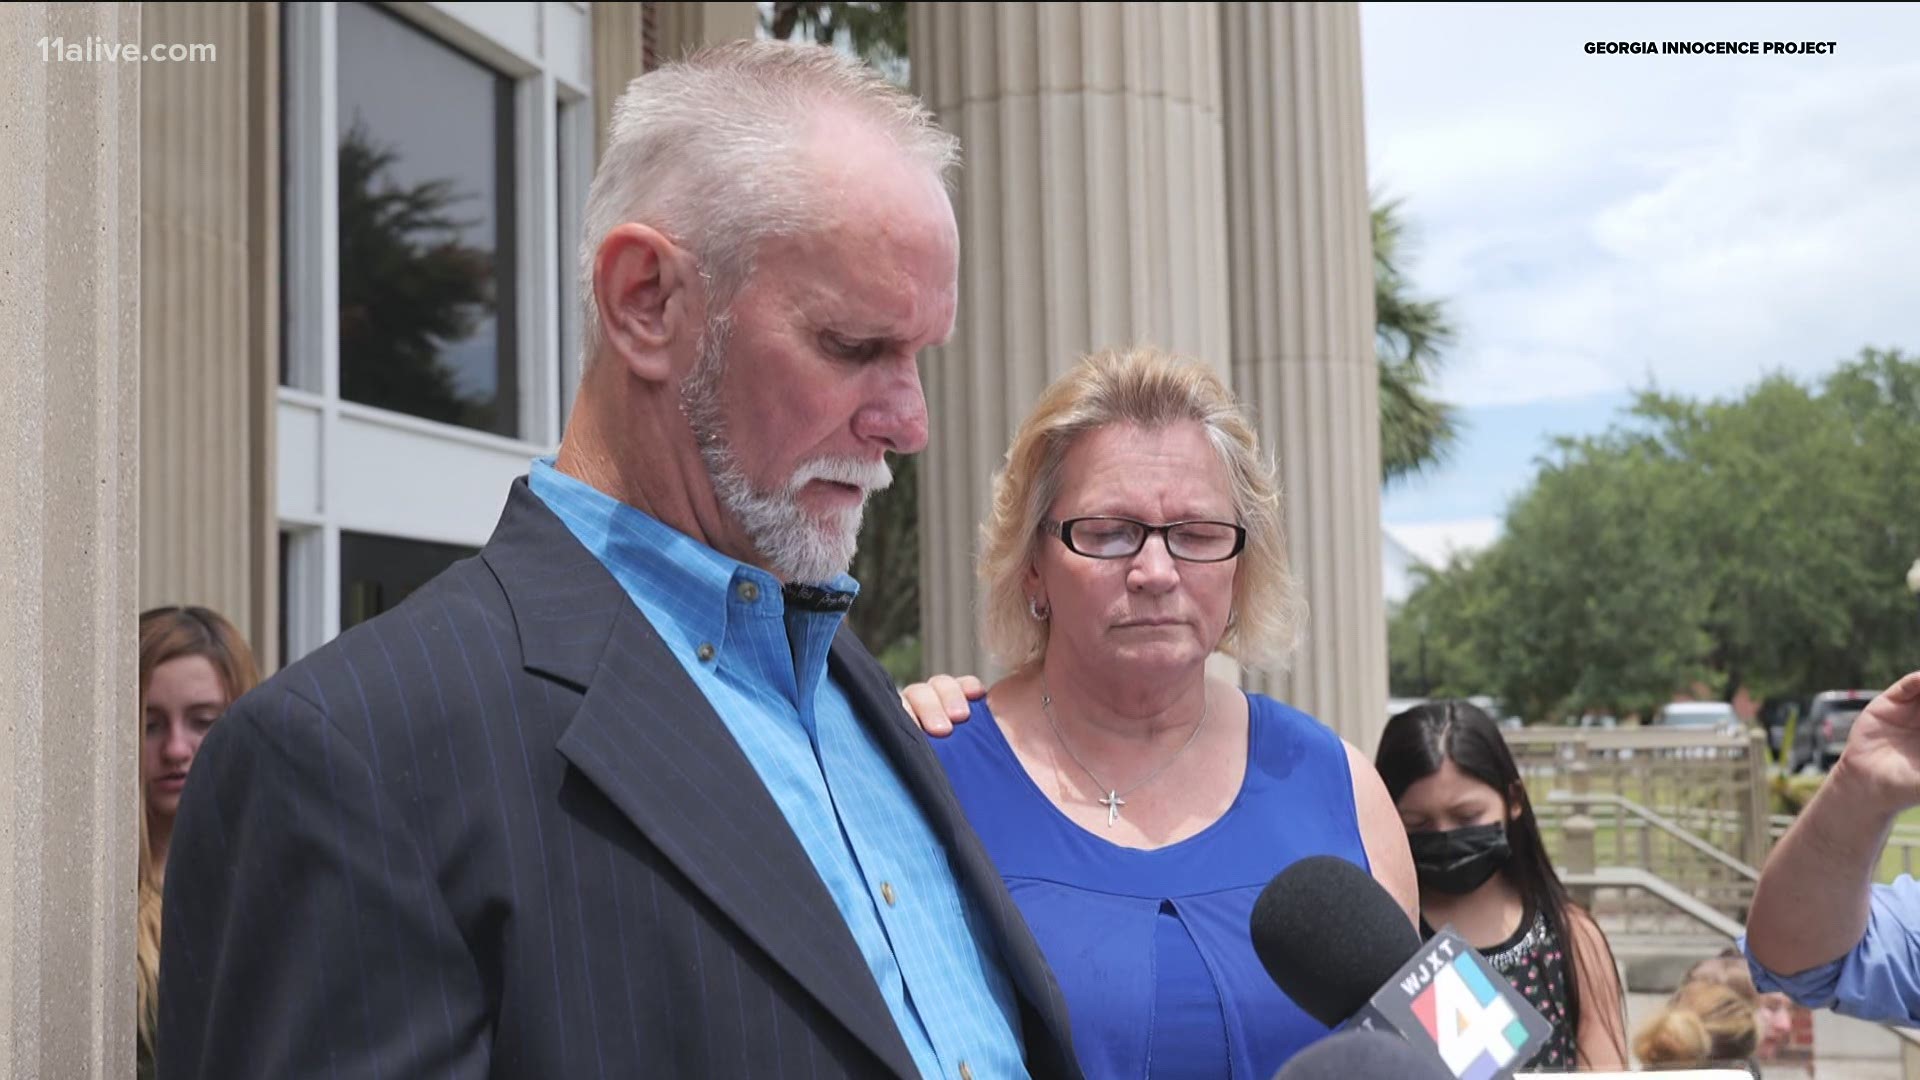 Dennis Perry walked free Monday when a judge dropped all charges against him.